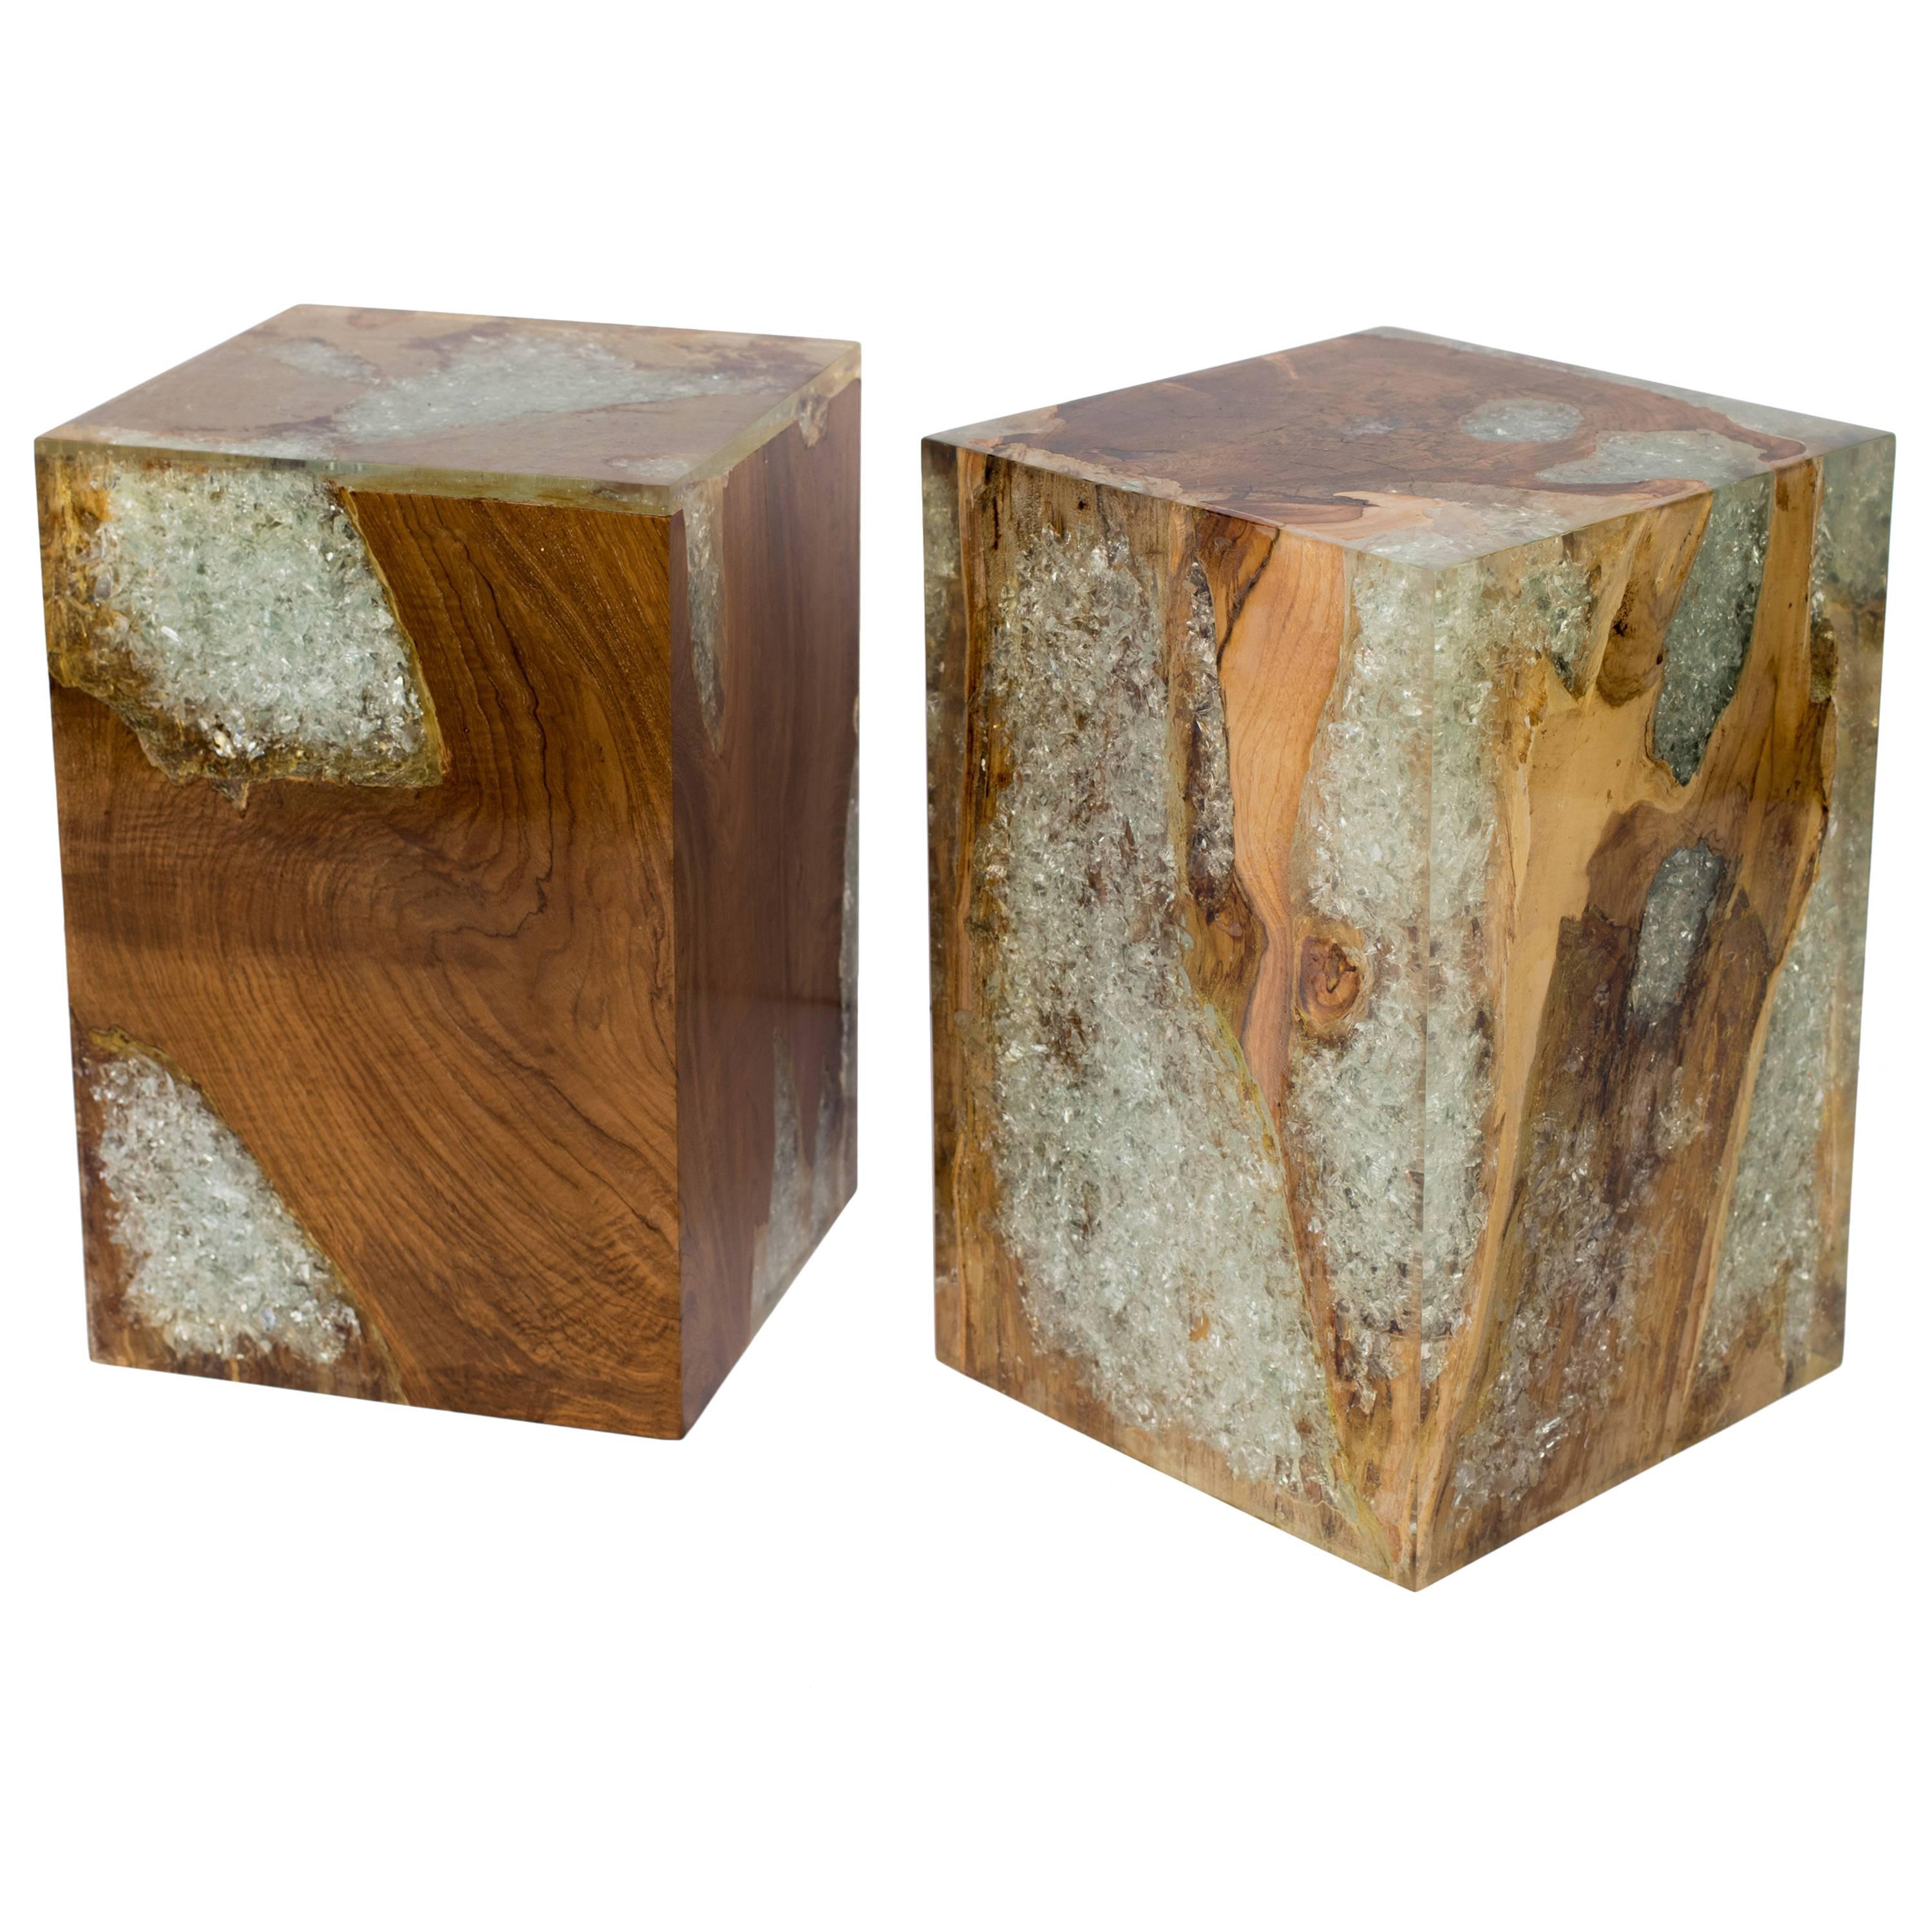 Pair of Organic Modern side tables in natural and bleached reclaimed teak root wood infused with cracked resin. Polished finish with unique wood variations on all sides. Handcrafted in Indonesia for multi-purpose use. Some variation in colors may be